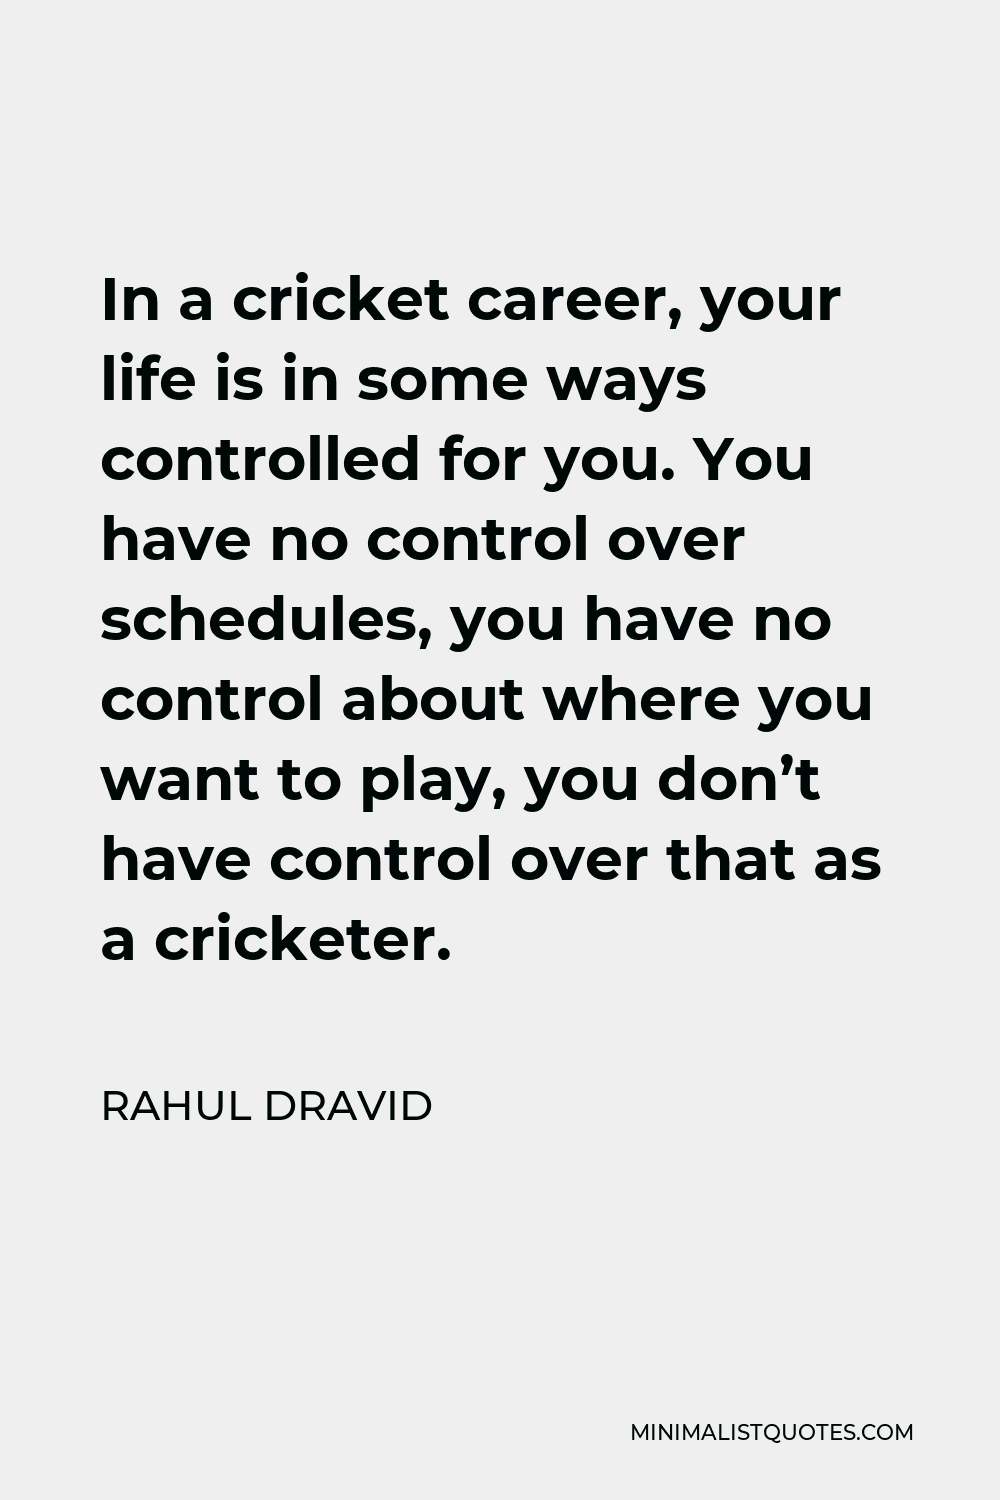 Rahul Dravid Quote - In a cricket career, your life is in some ways controlled for you. You have no control over schedules, you have no control about where you want to play, you don’t have control over that as a cricketer.